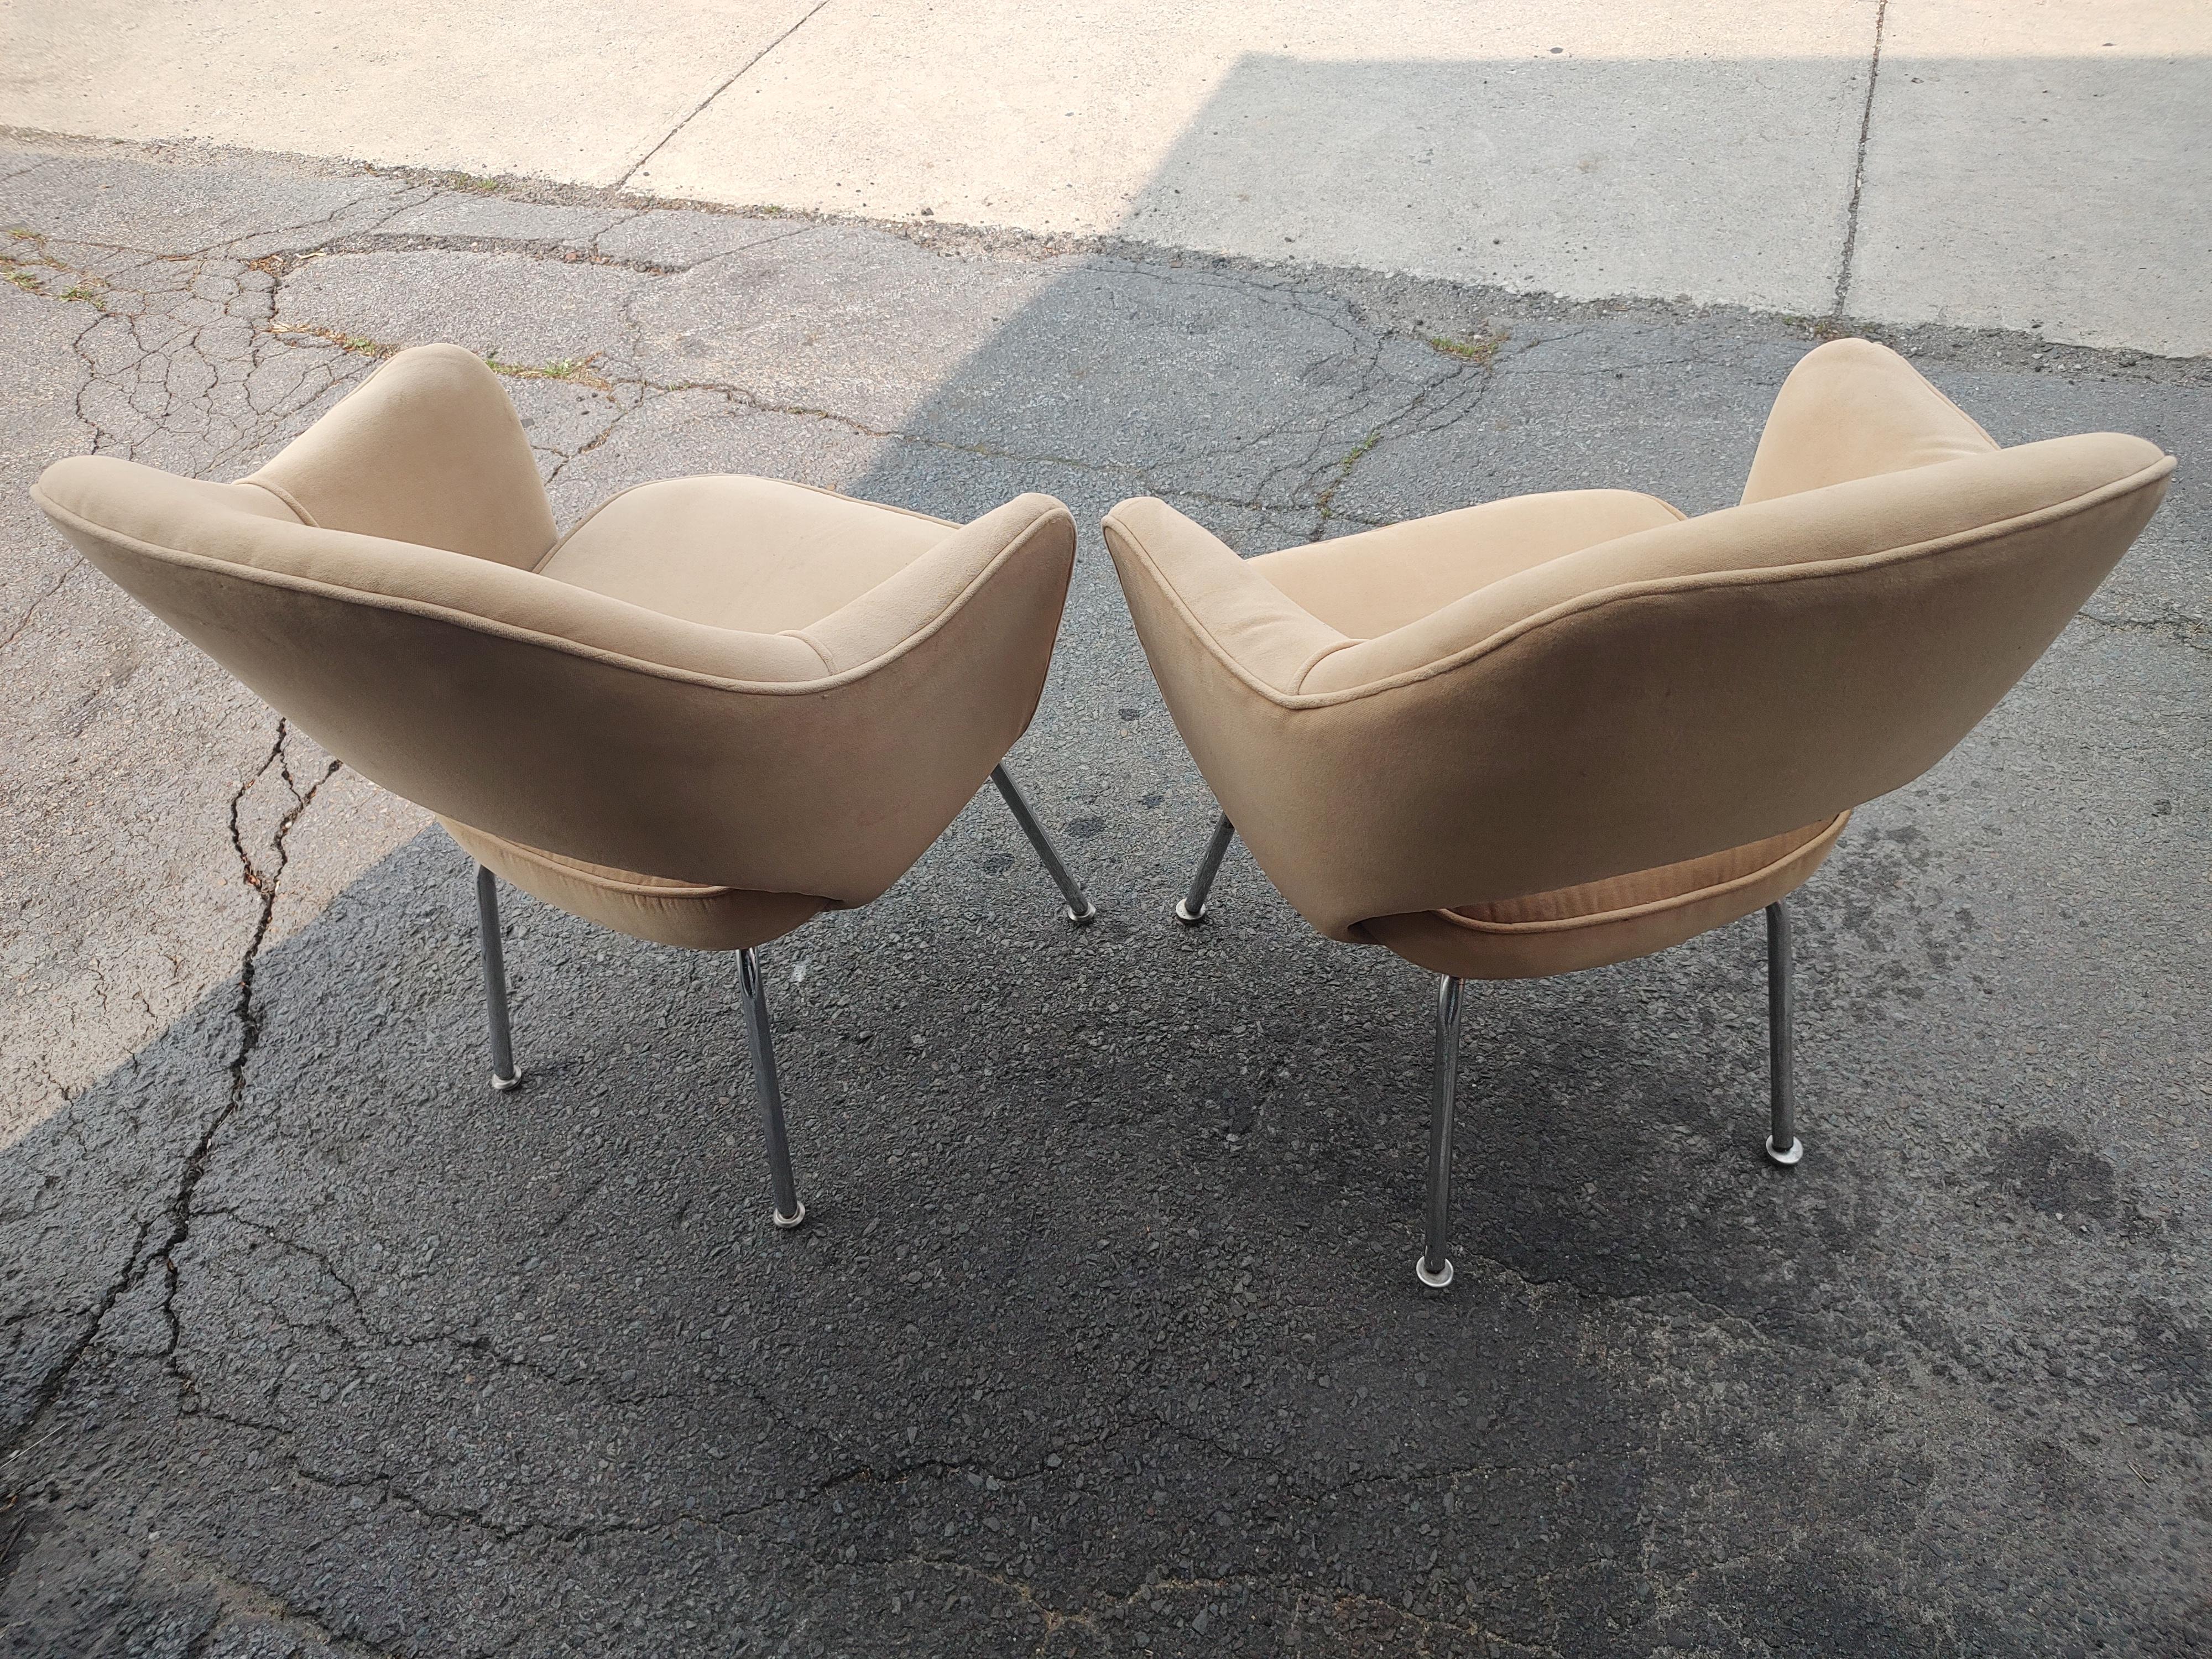 Pair of Mid-Century Modern Executive Armchairs by Eero Saarinen for Knoll, C1965 For Sale 3